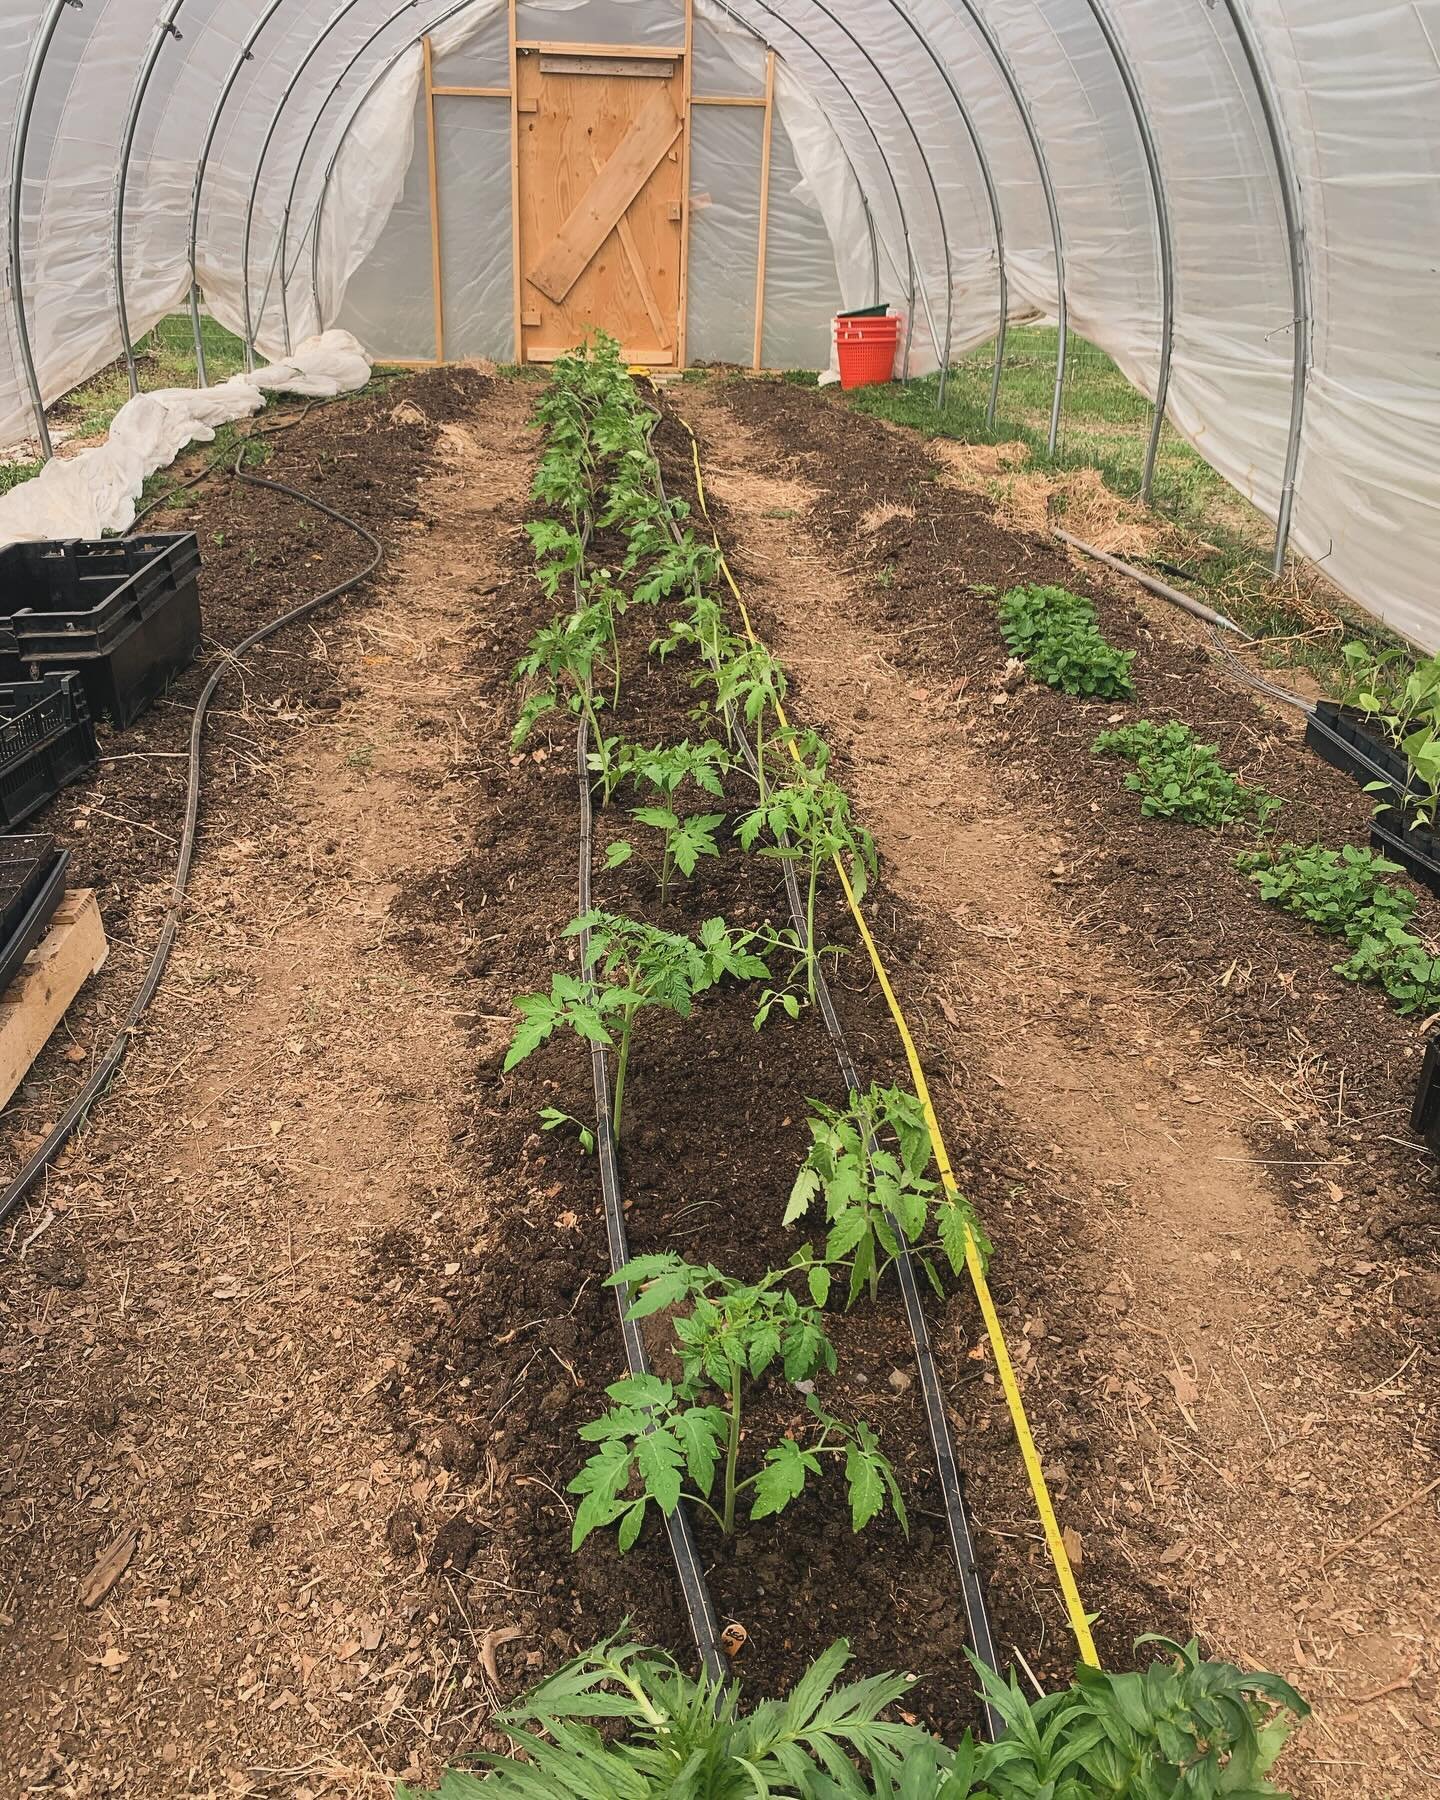 One bed of tomatoes in! 😬 I hope it&rsquo;s not too early 😬

This is the earliest we&rsquo;ve transplanted toms in the very unheated hoop house. The forecast looks fine but I keep thinking about last year&rsquo;s May frost that killed a few beds in